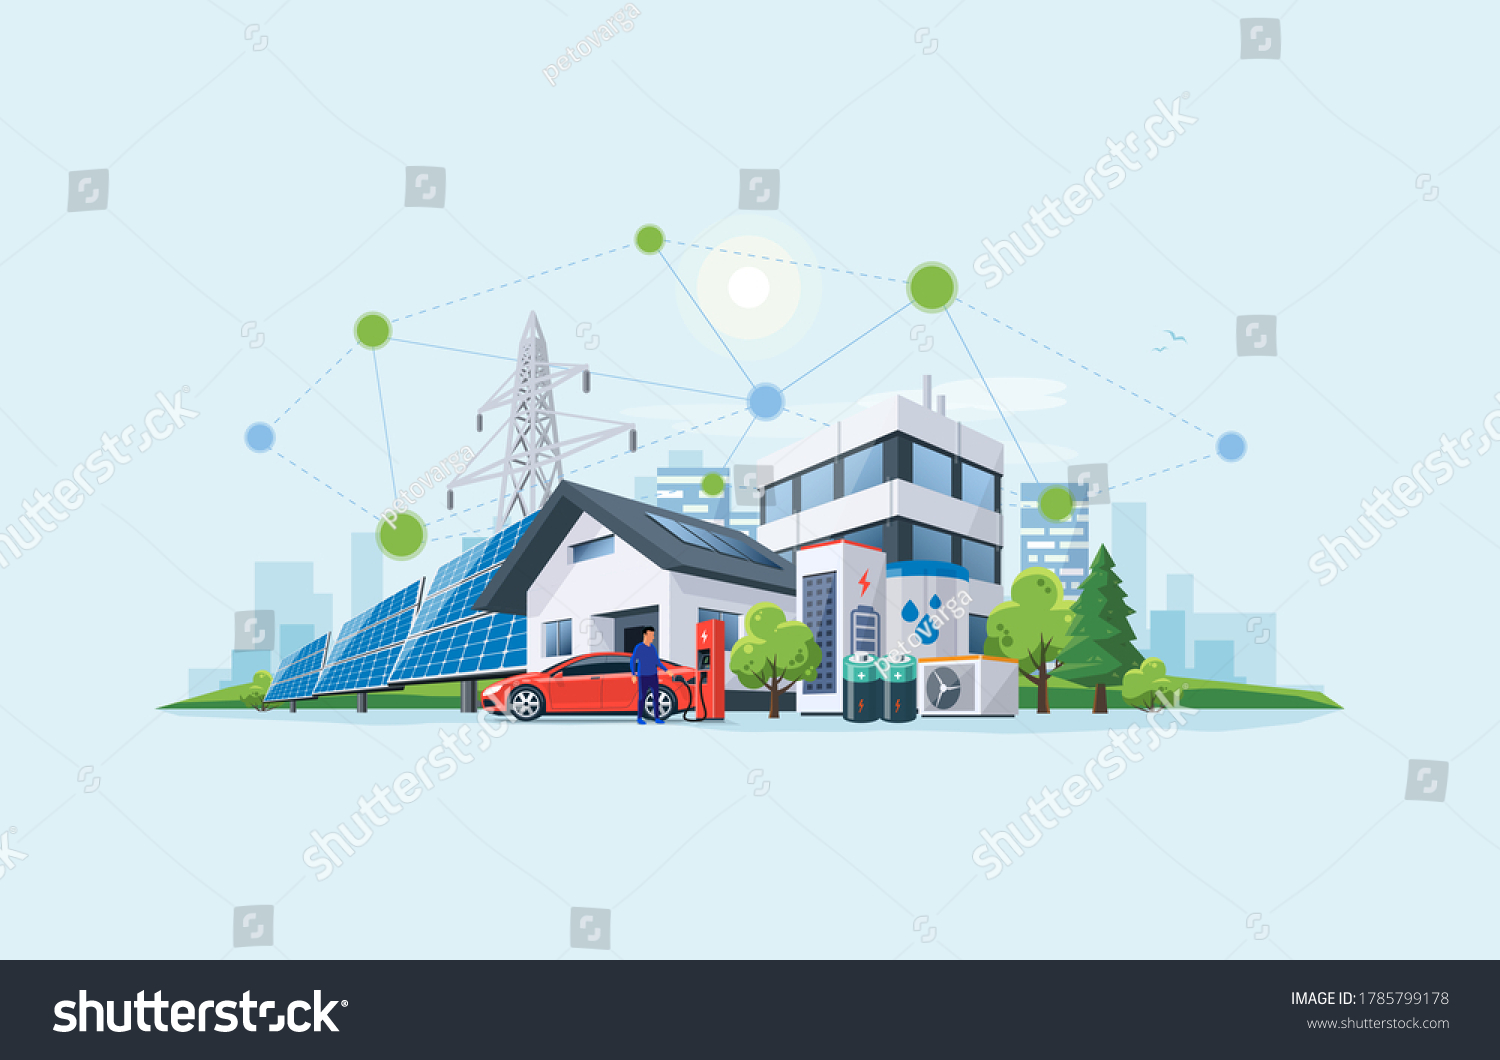 Smart renewable energy power grid system. Off-grid building city battery storage sustainable island electrification. Electric car charging with solar panels, wind, high voltage power grid and city.  #1785799178